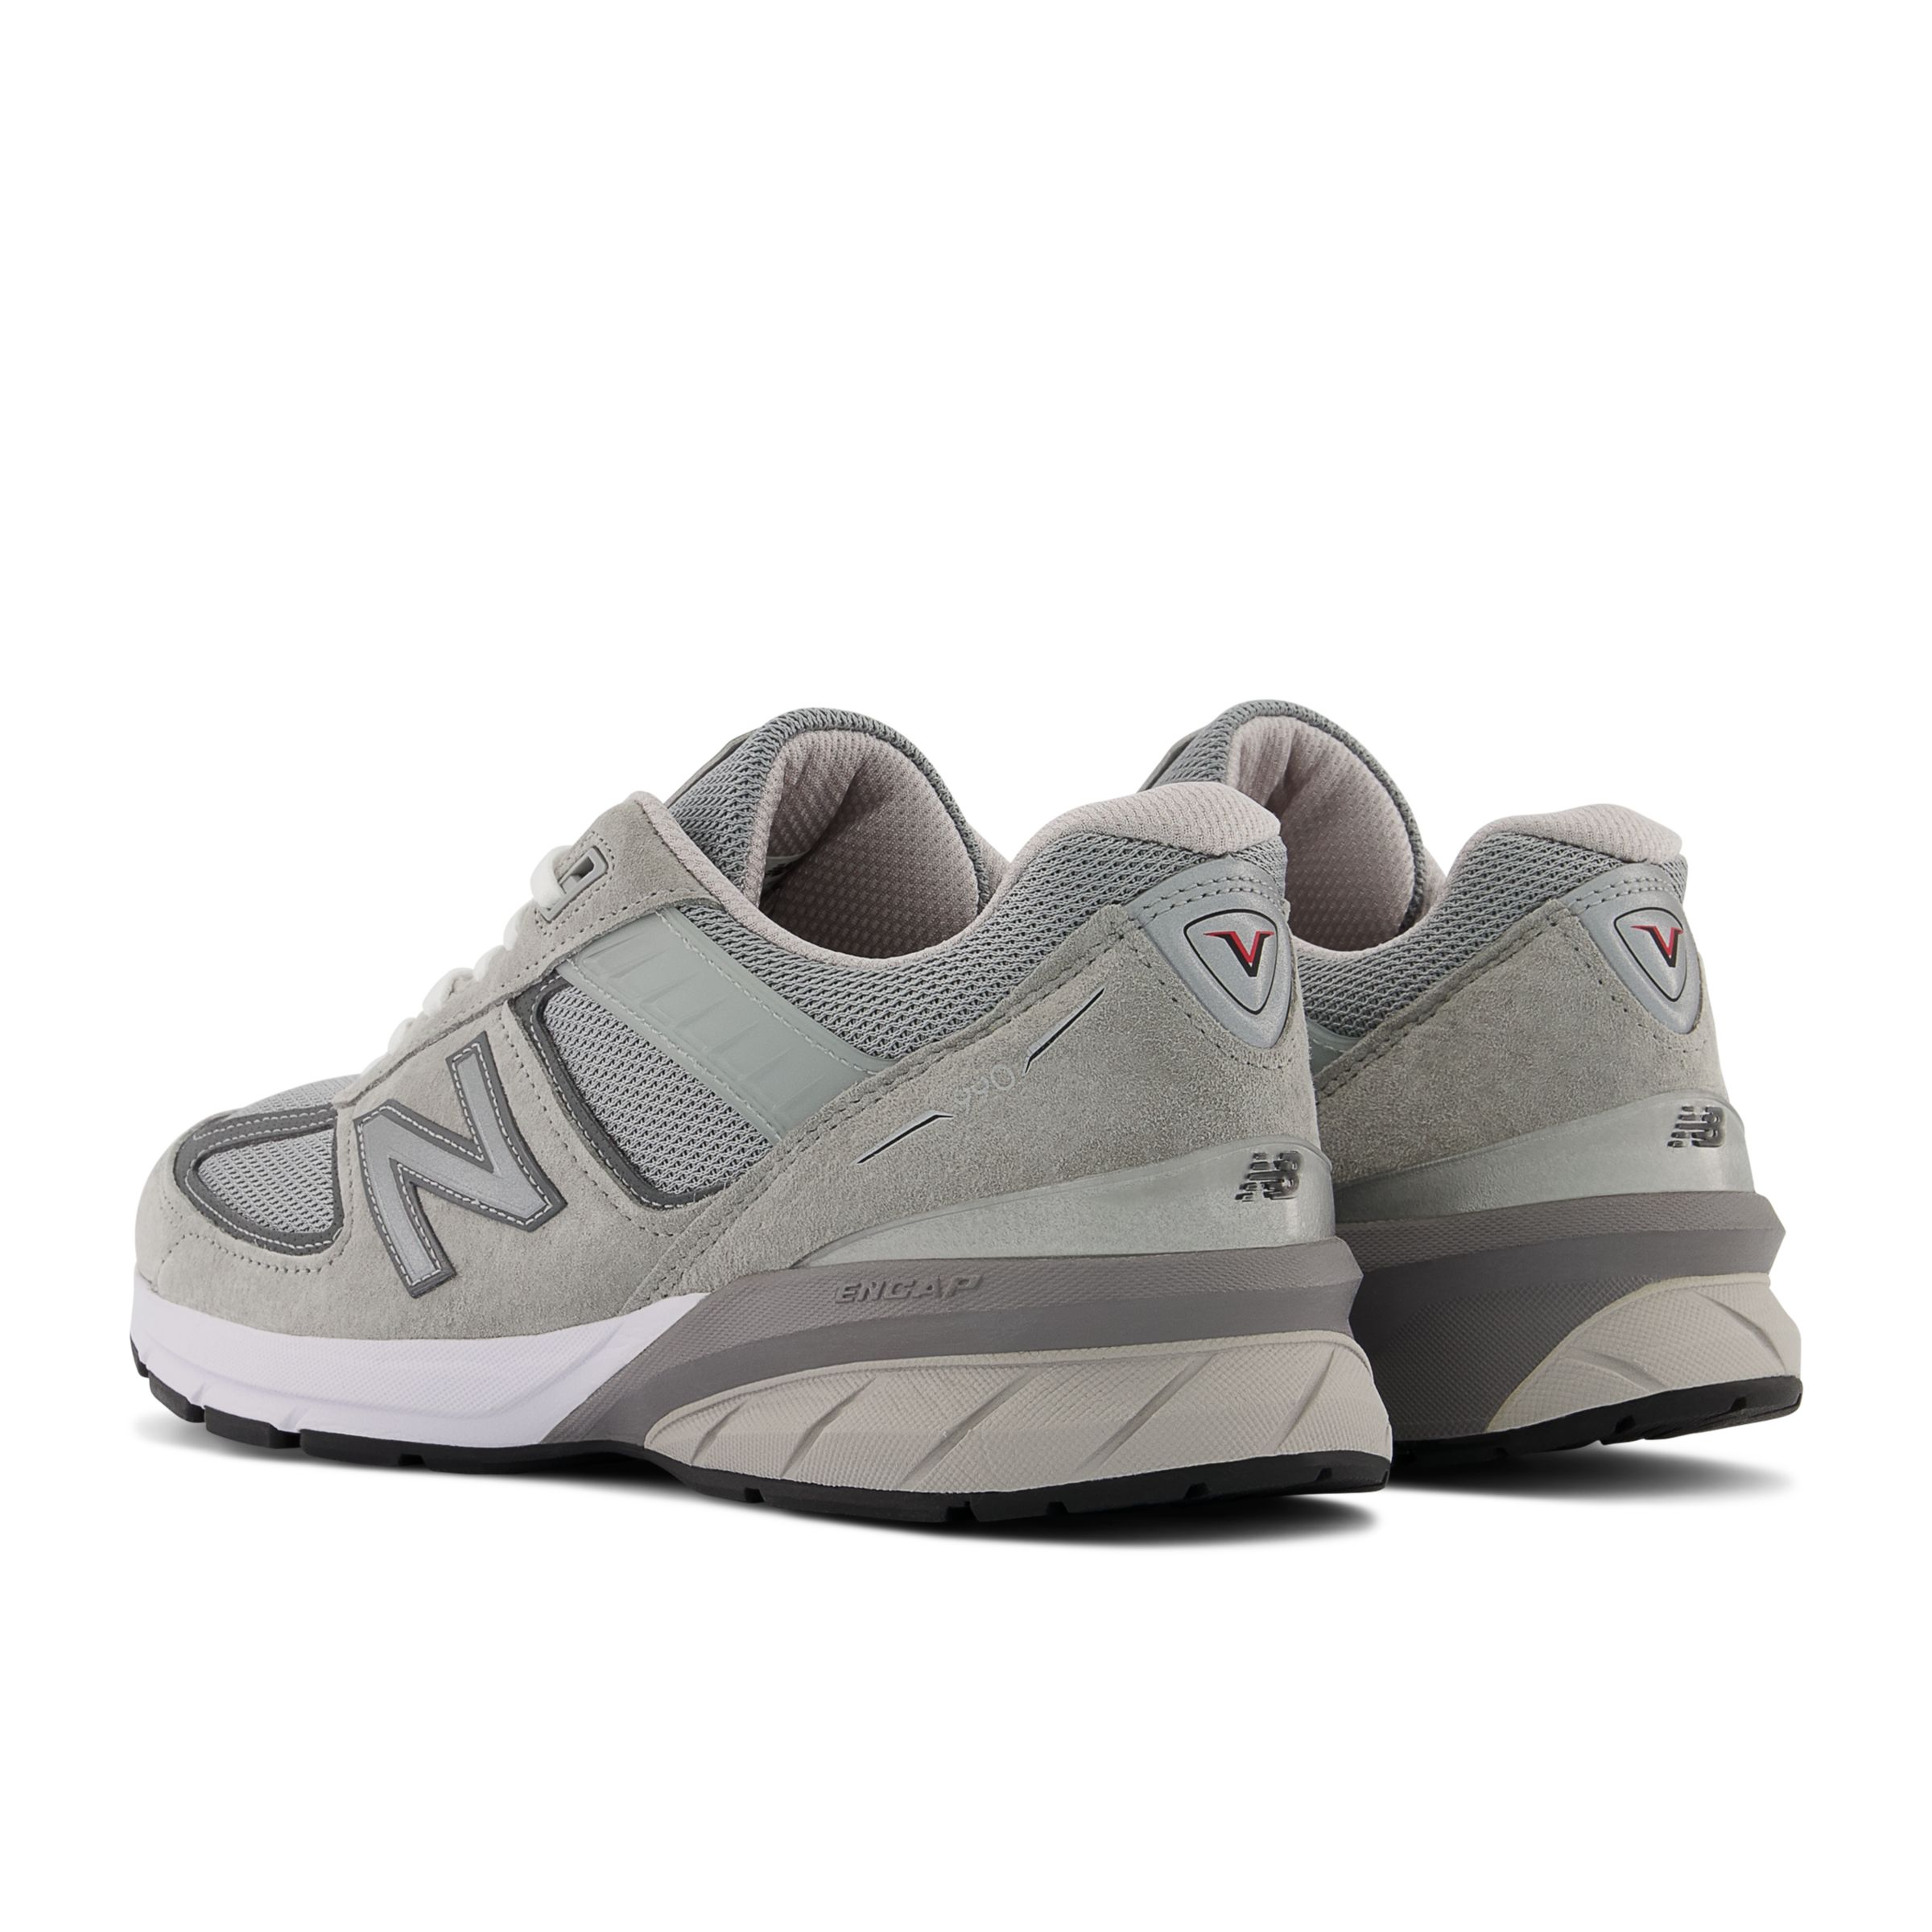 new balance made in us 990v5